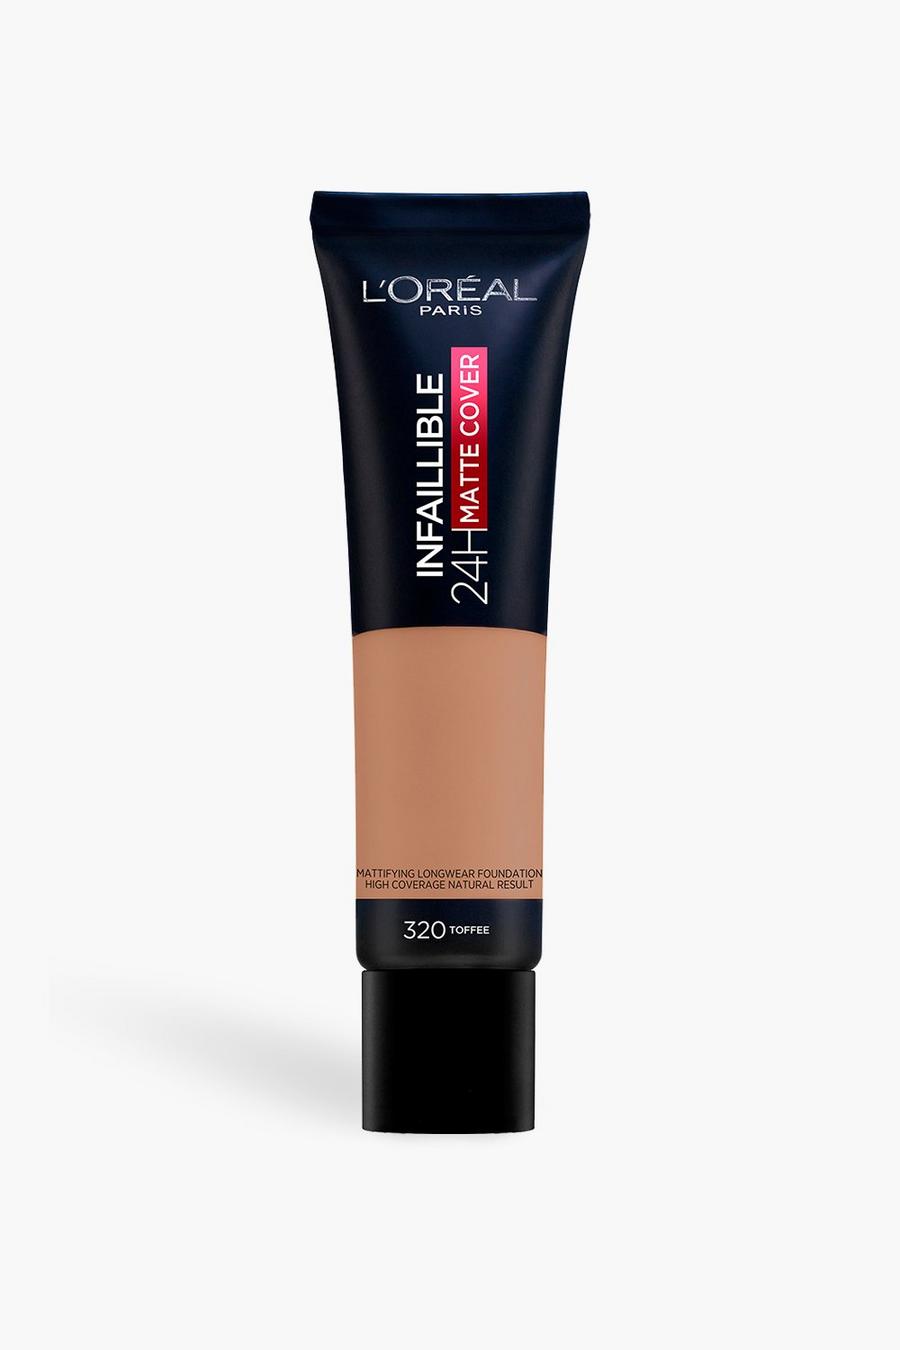 Nude L'Oréal Paris Infallible 24H Matte Liquid Foundation, Shade 320 Toffee, SPF 18, 30ml image number 1